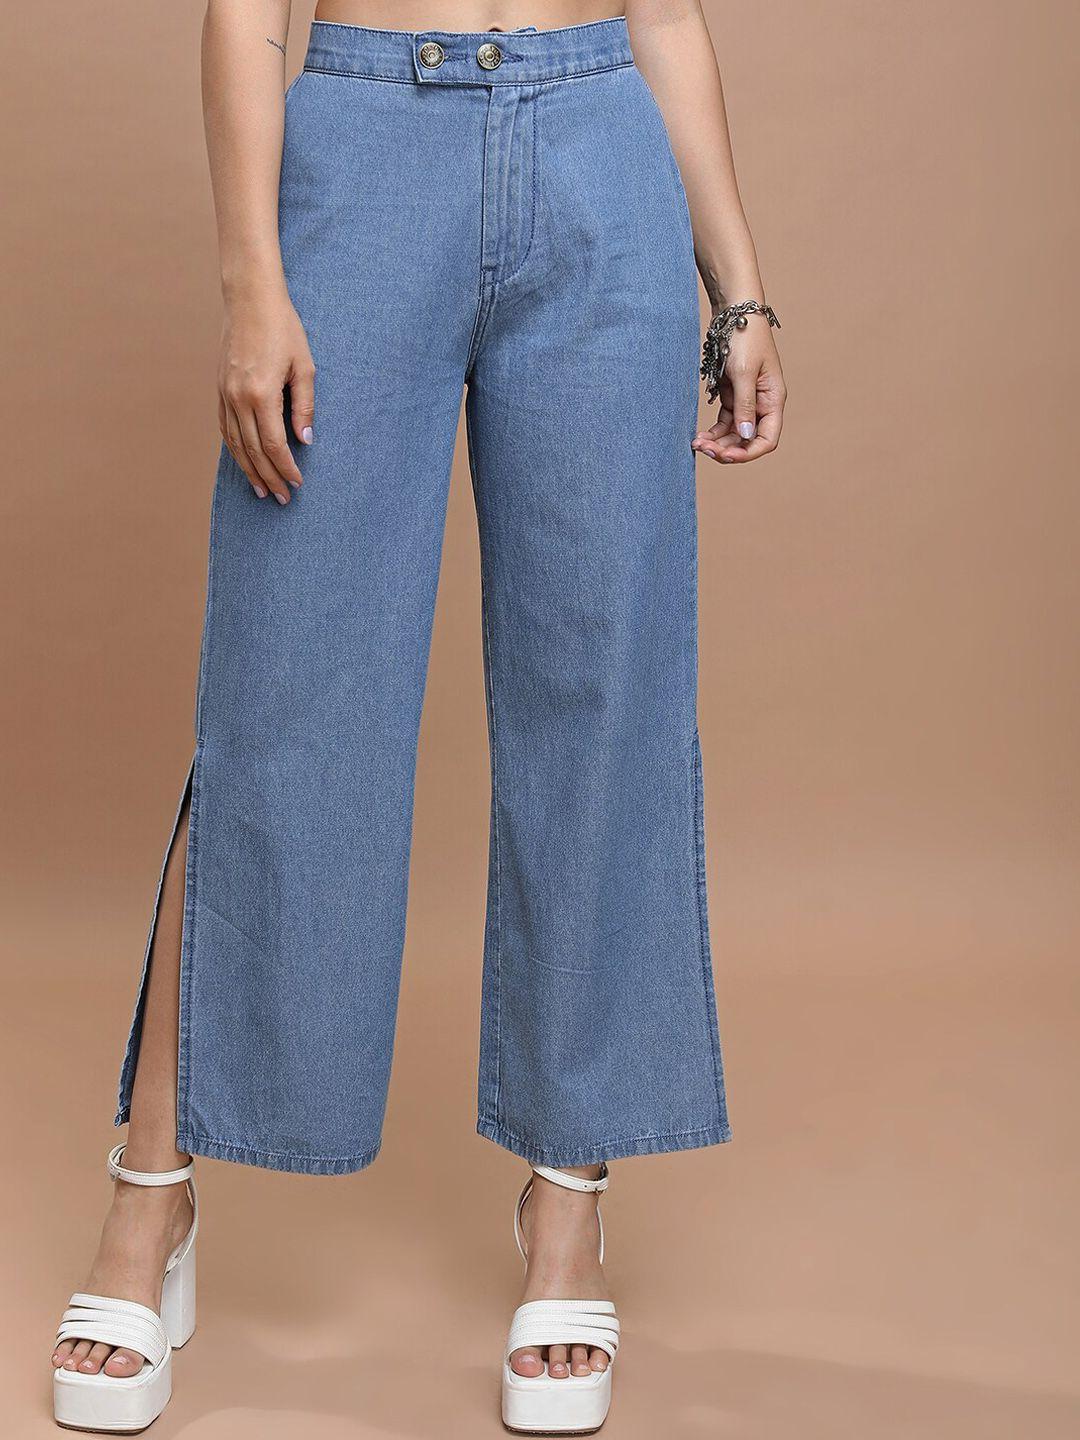 tokyo-talkies-women-mid-rise-clean-look-relaxed-fit-light-fade-jeans